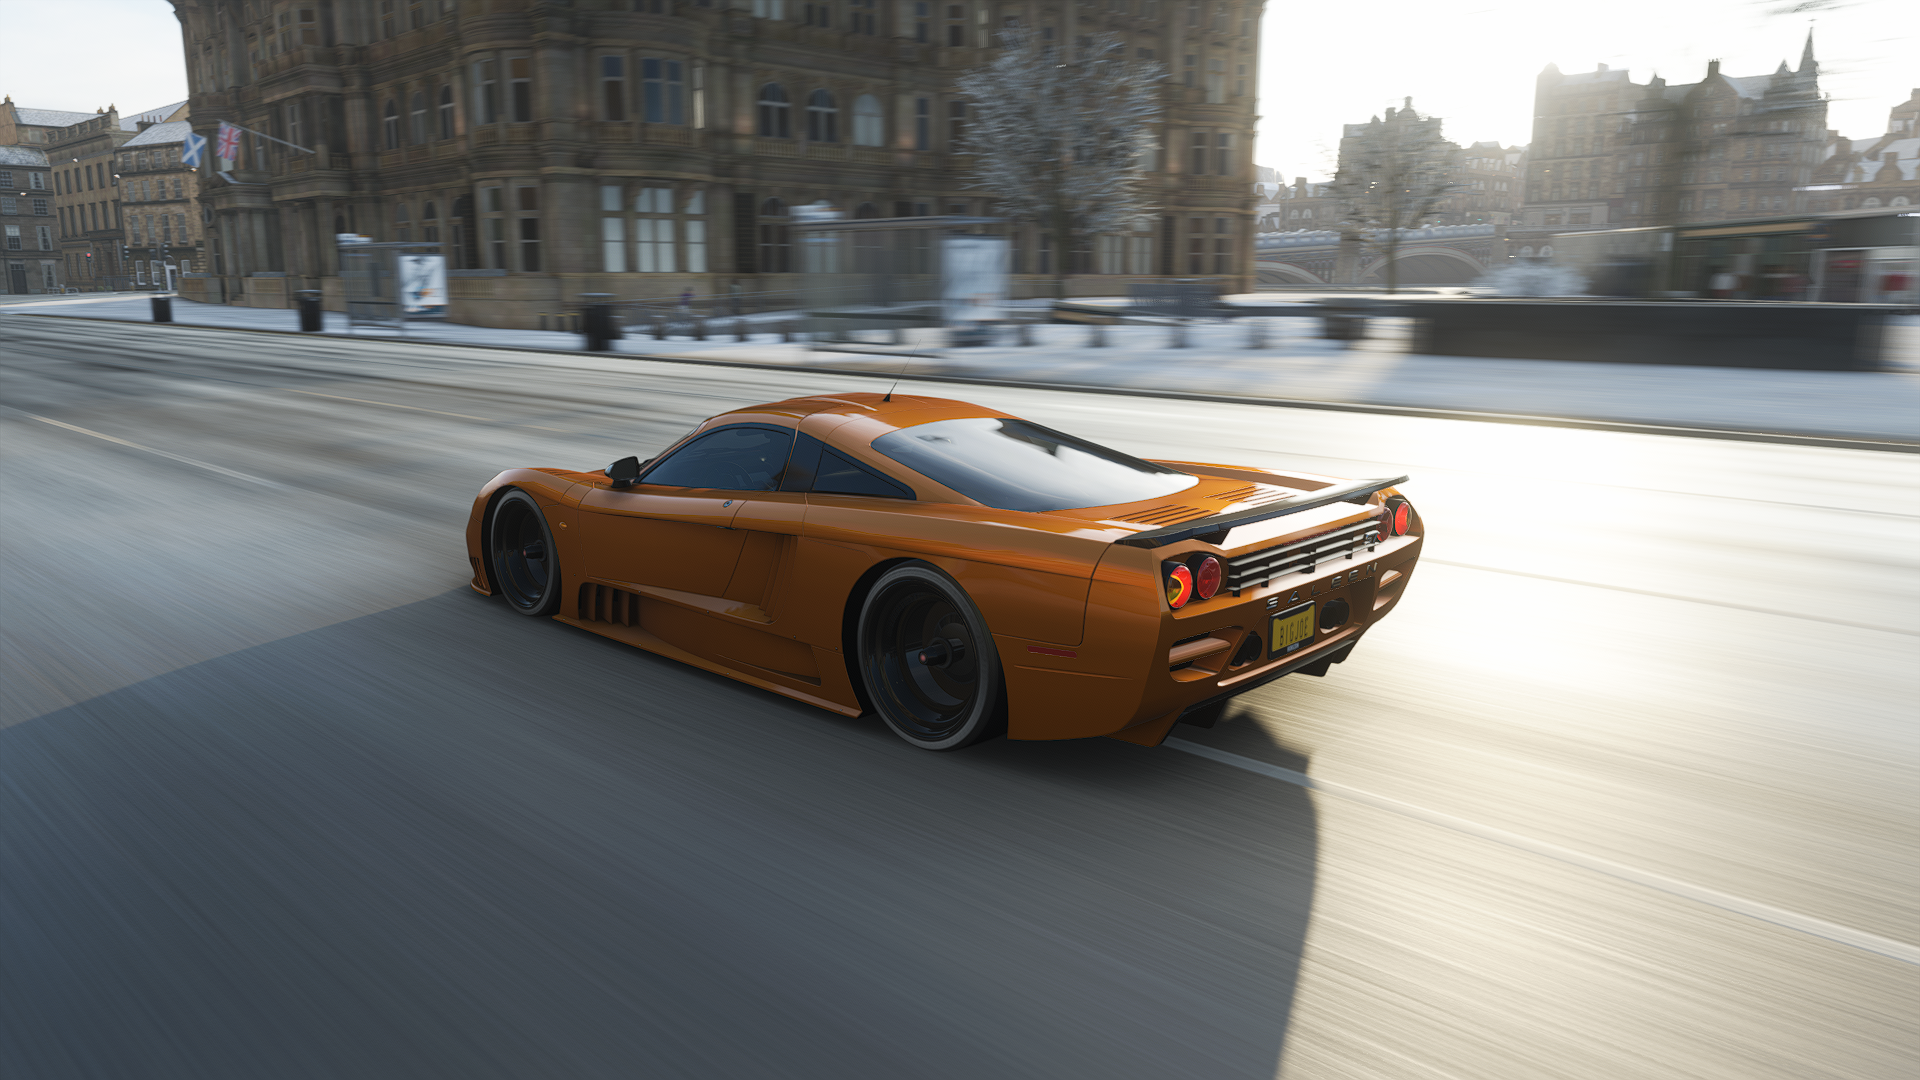 General 1920x1080 Forza Horizon 4 Forza Horizon Forza driving CGI car supercars Saleen S7 video games vehicle rear view taillights building trees flag road blurry background blurred sunlight